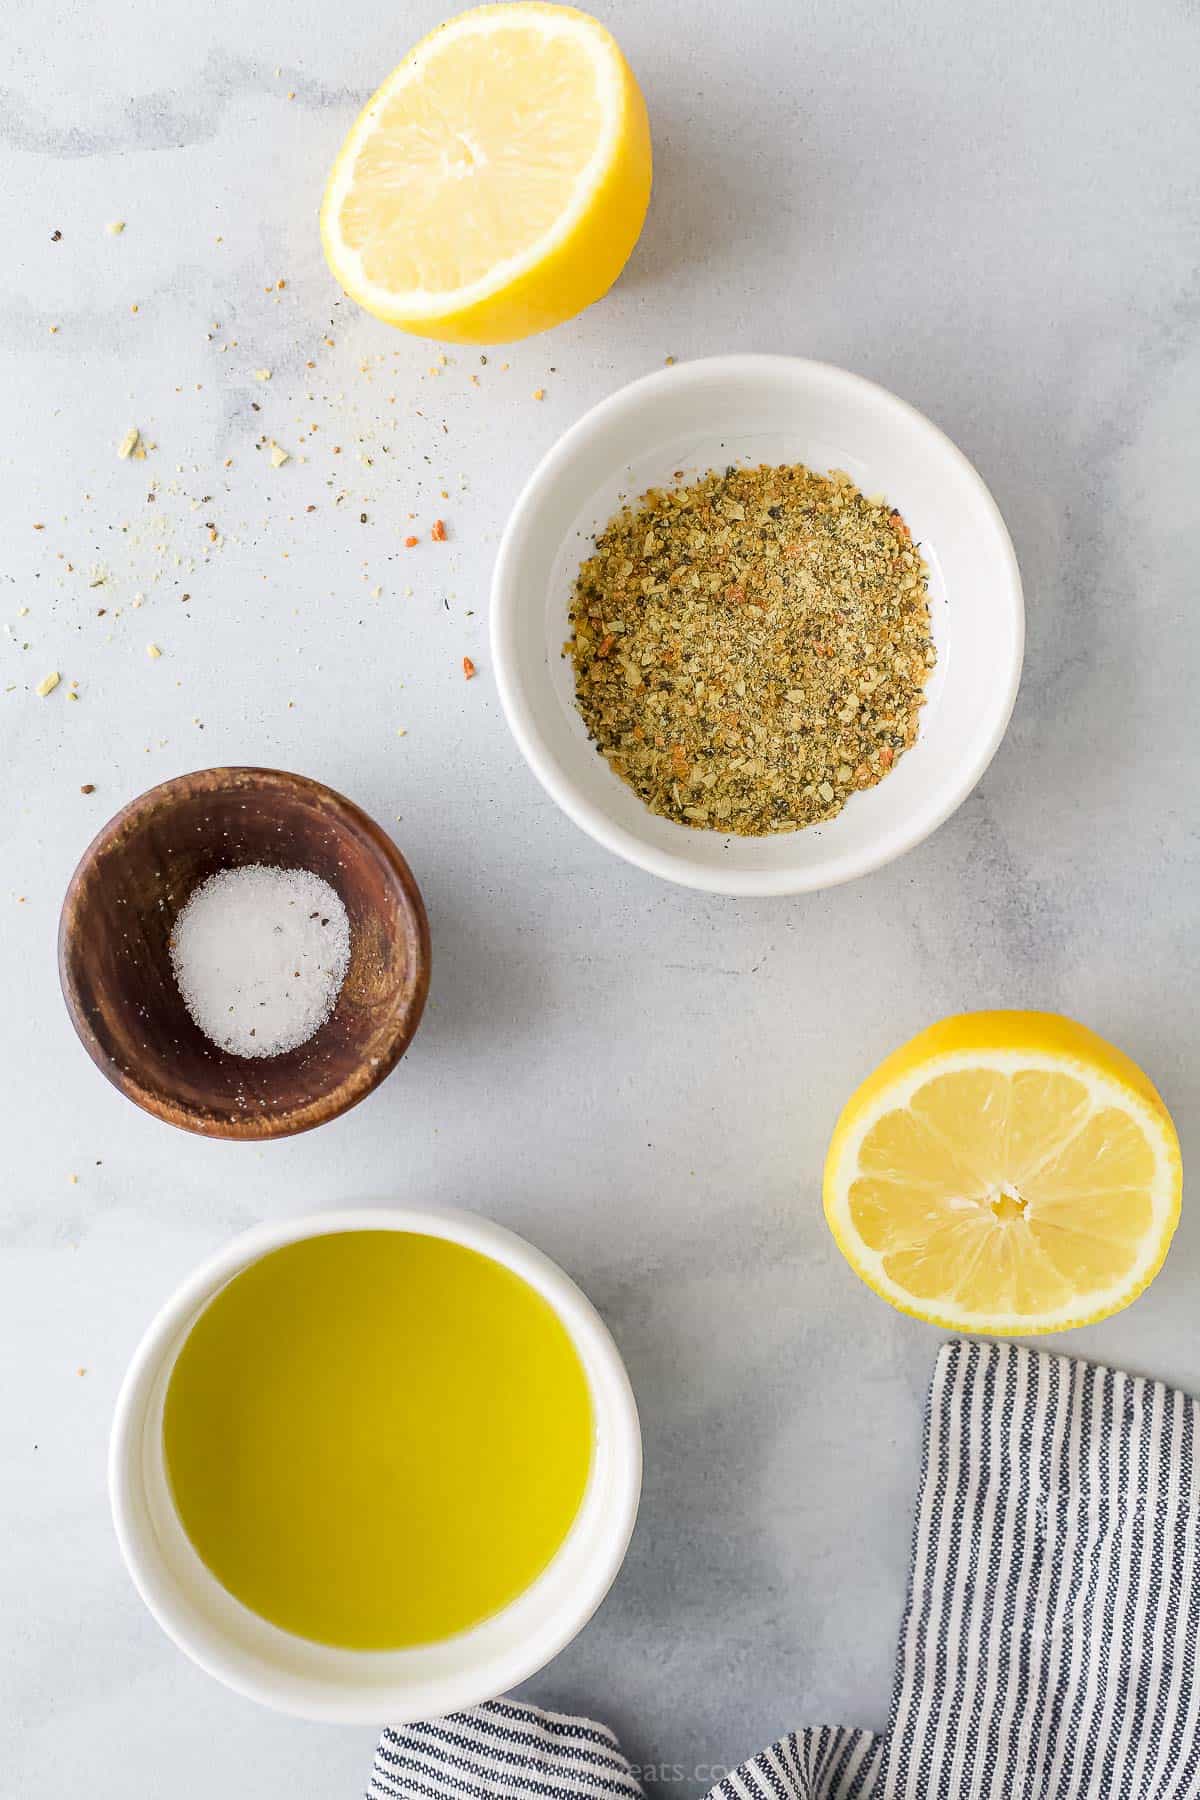 Olive oil, fresh lemon halves and the rest of the ingredients on a kitchen countertop beside a striped dishtowel